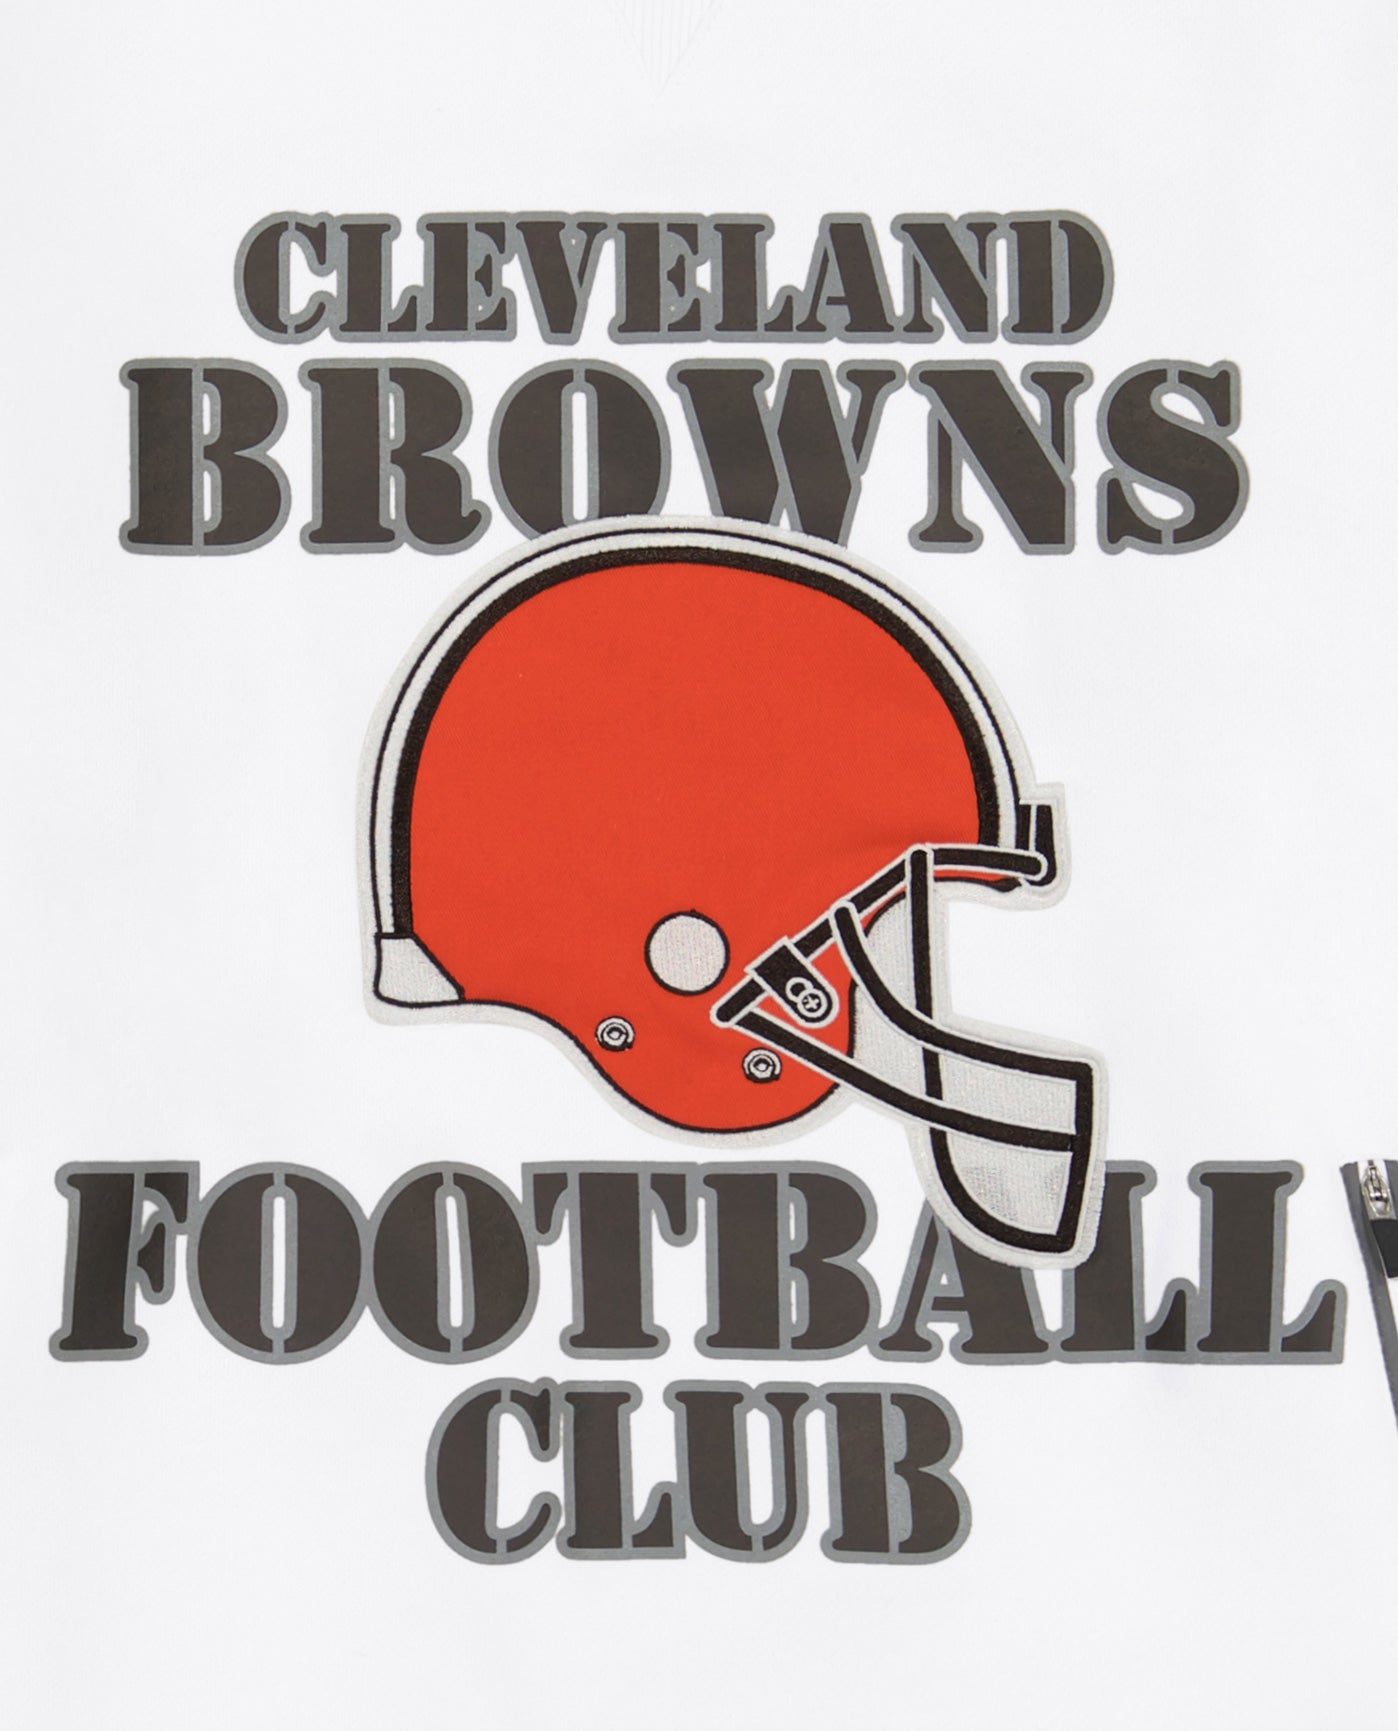 CLEVELAND BROWNS FOOTBALL CLUB writing and helmet logo front | Browns White